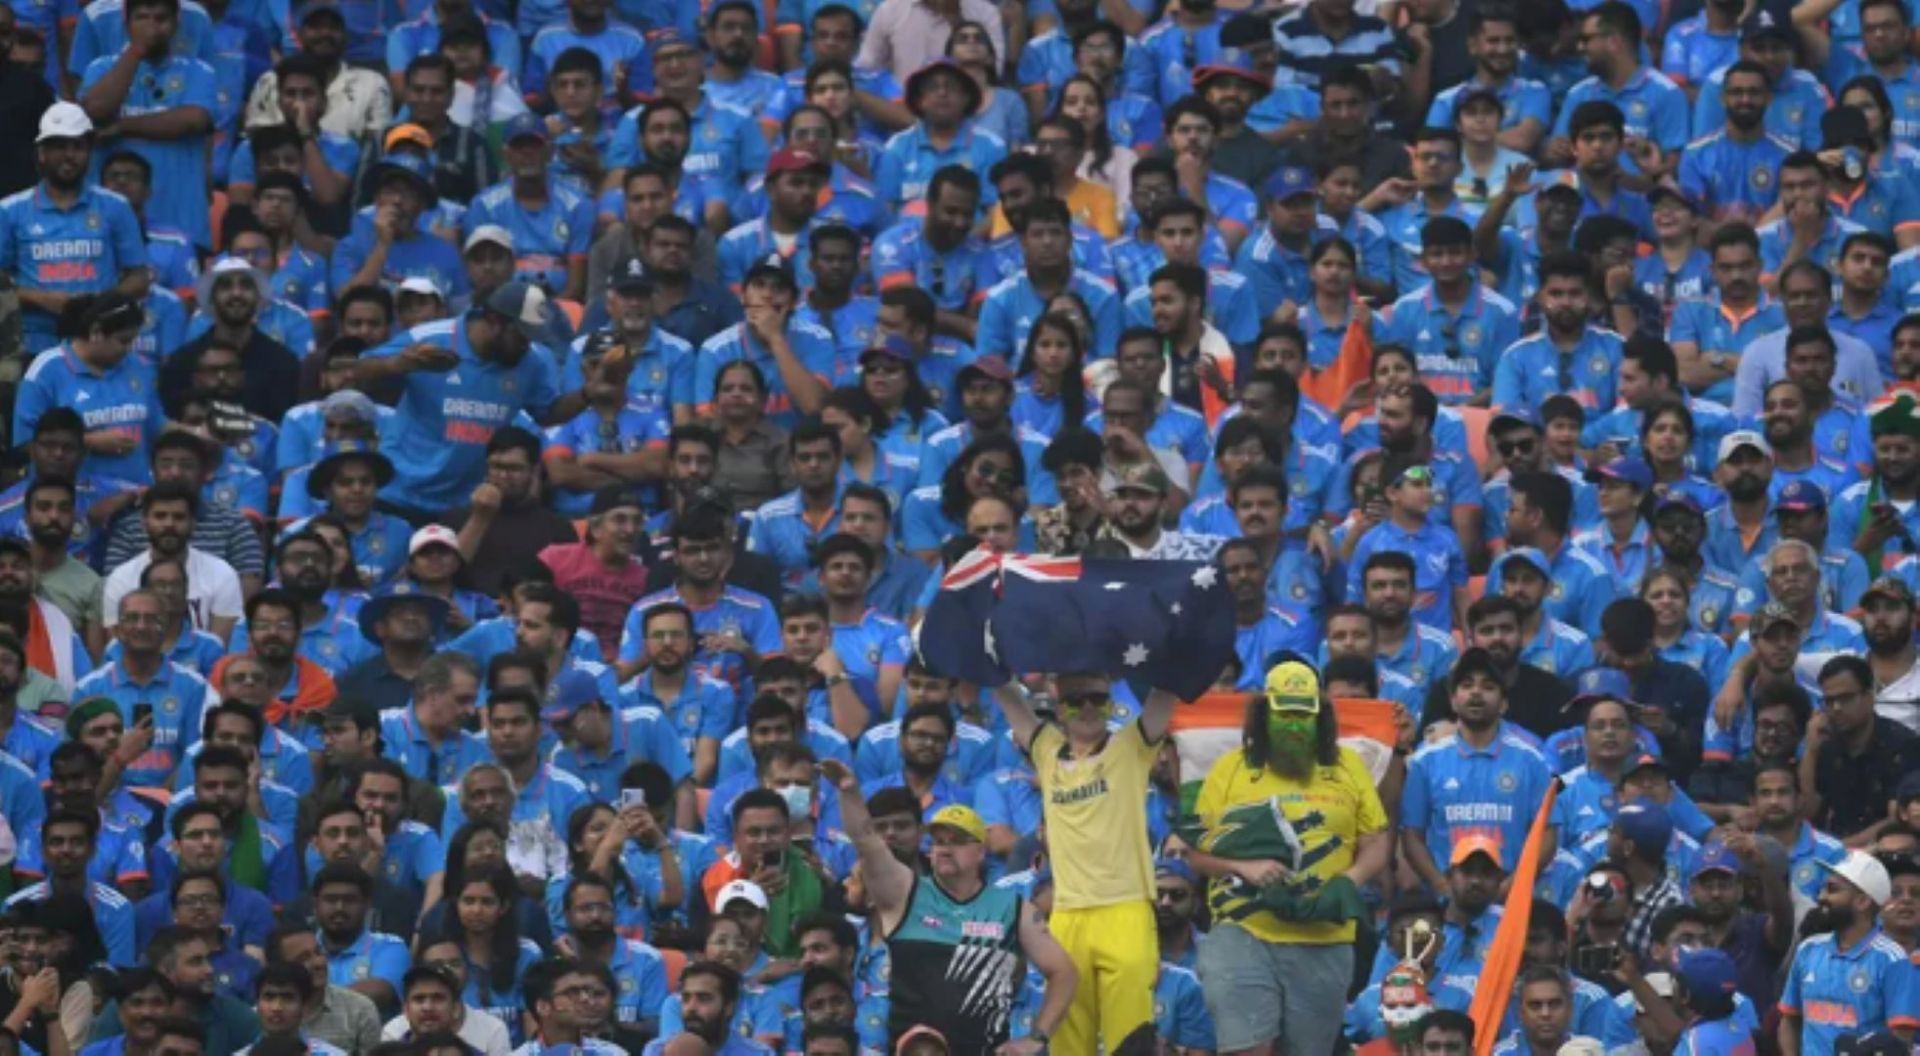 Fans in India flocked the stadiums throughout the tournament